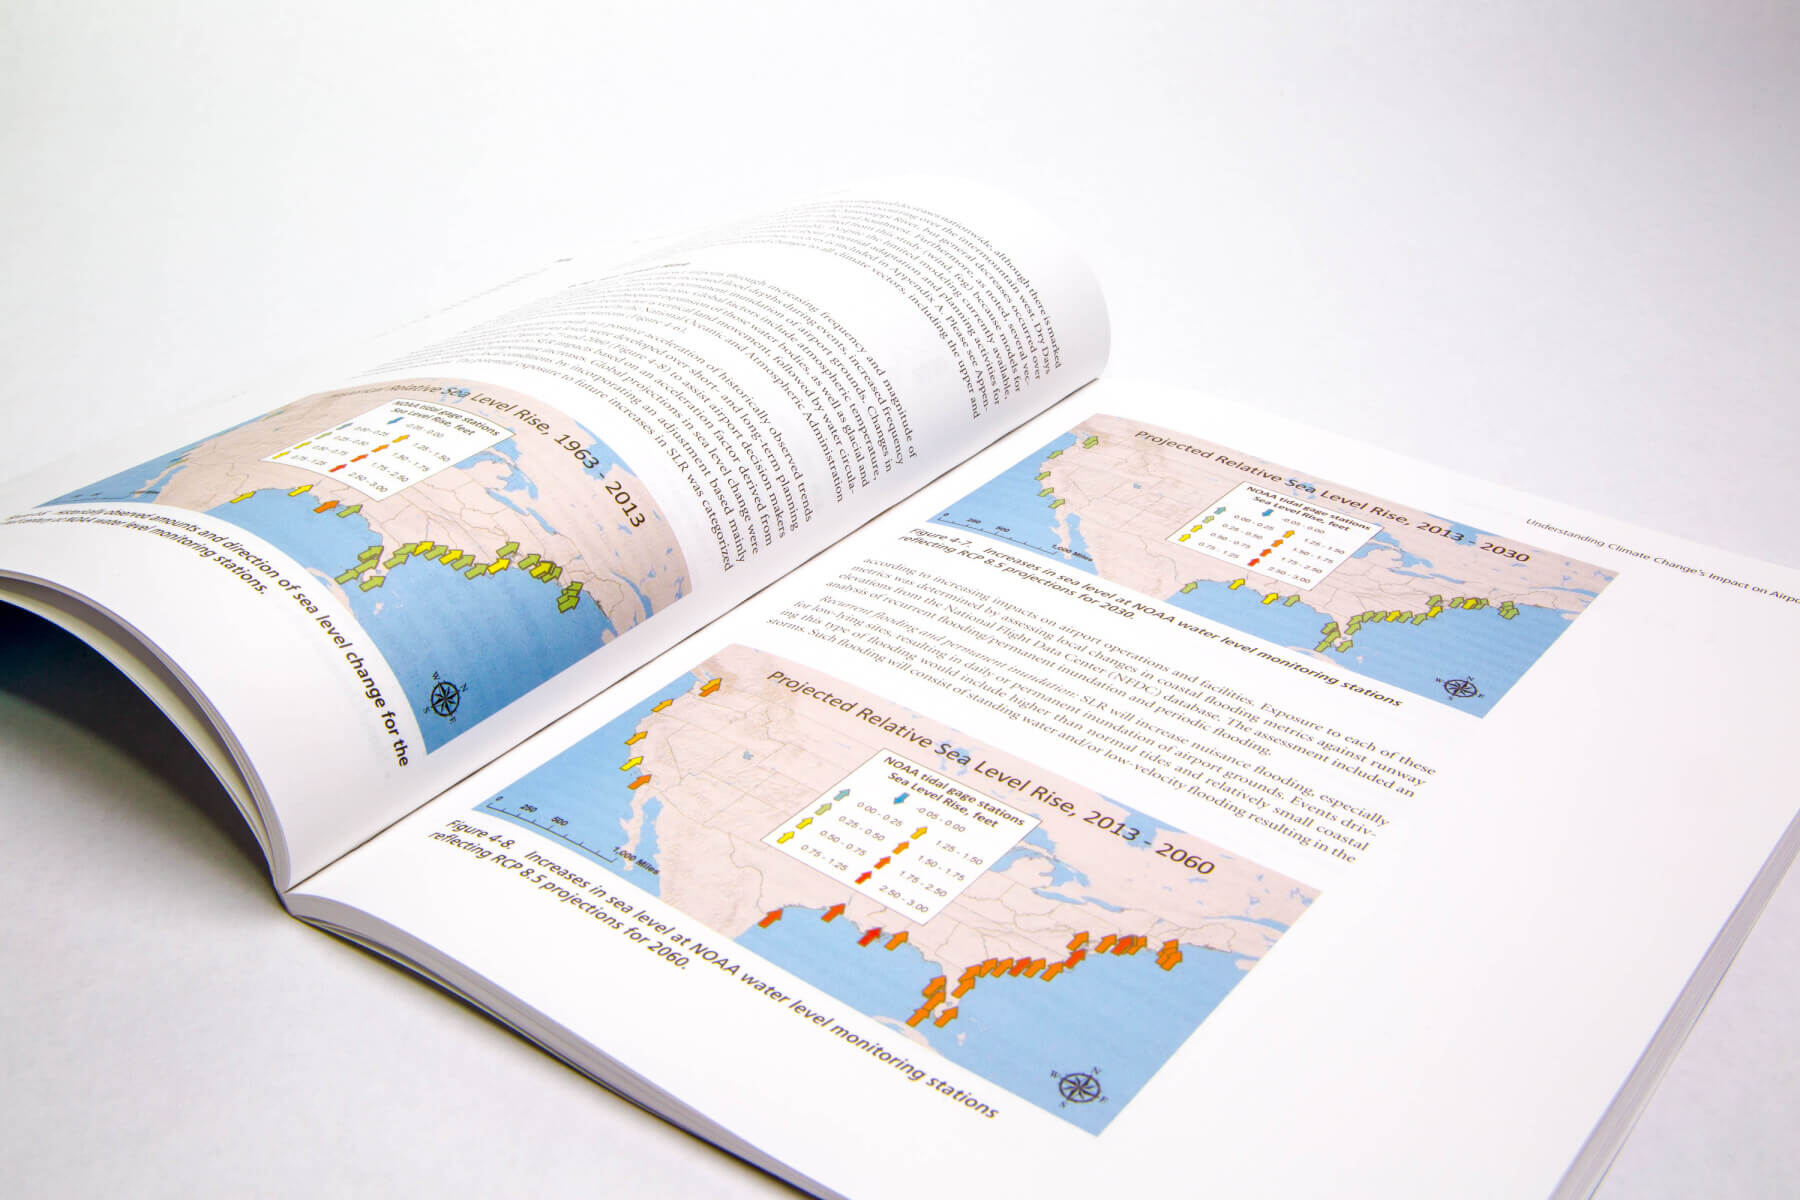 a close up of a page inside ACRP research report 147 with charts showing sea level rise